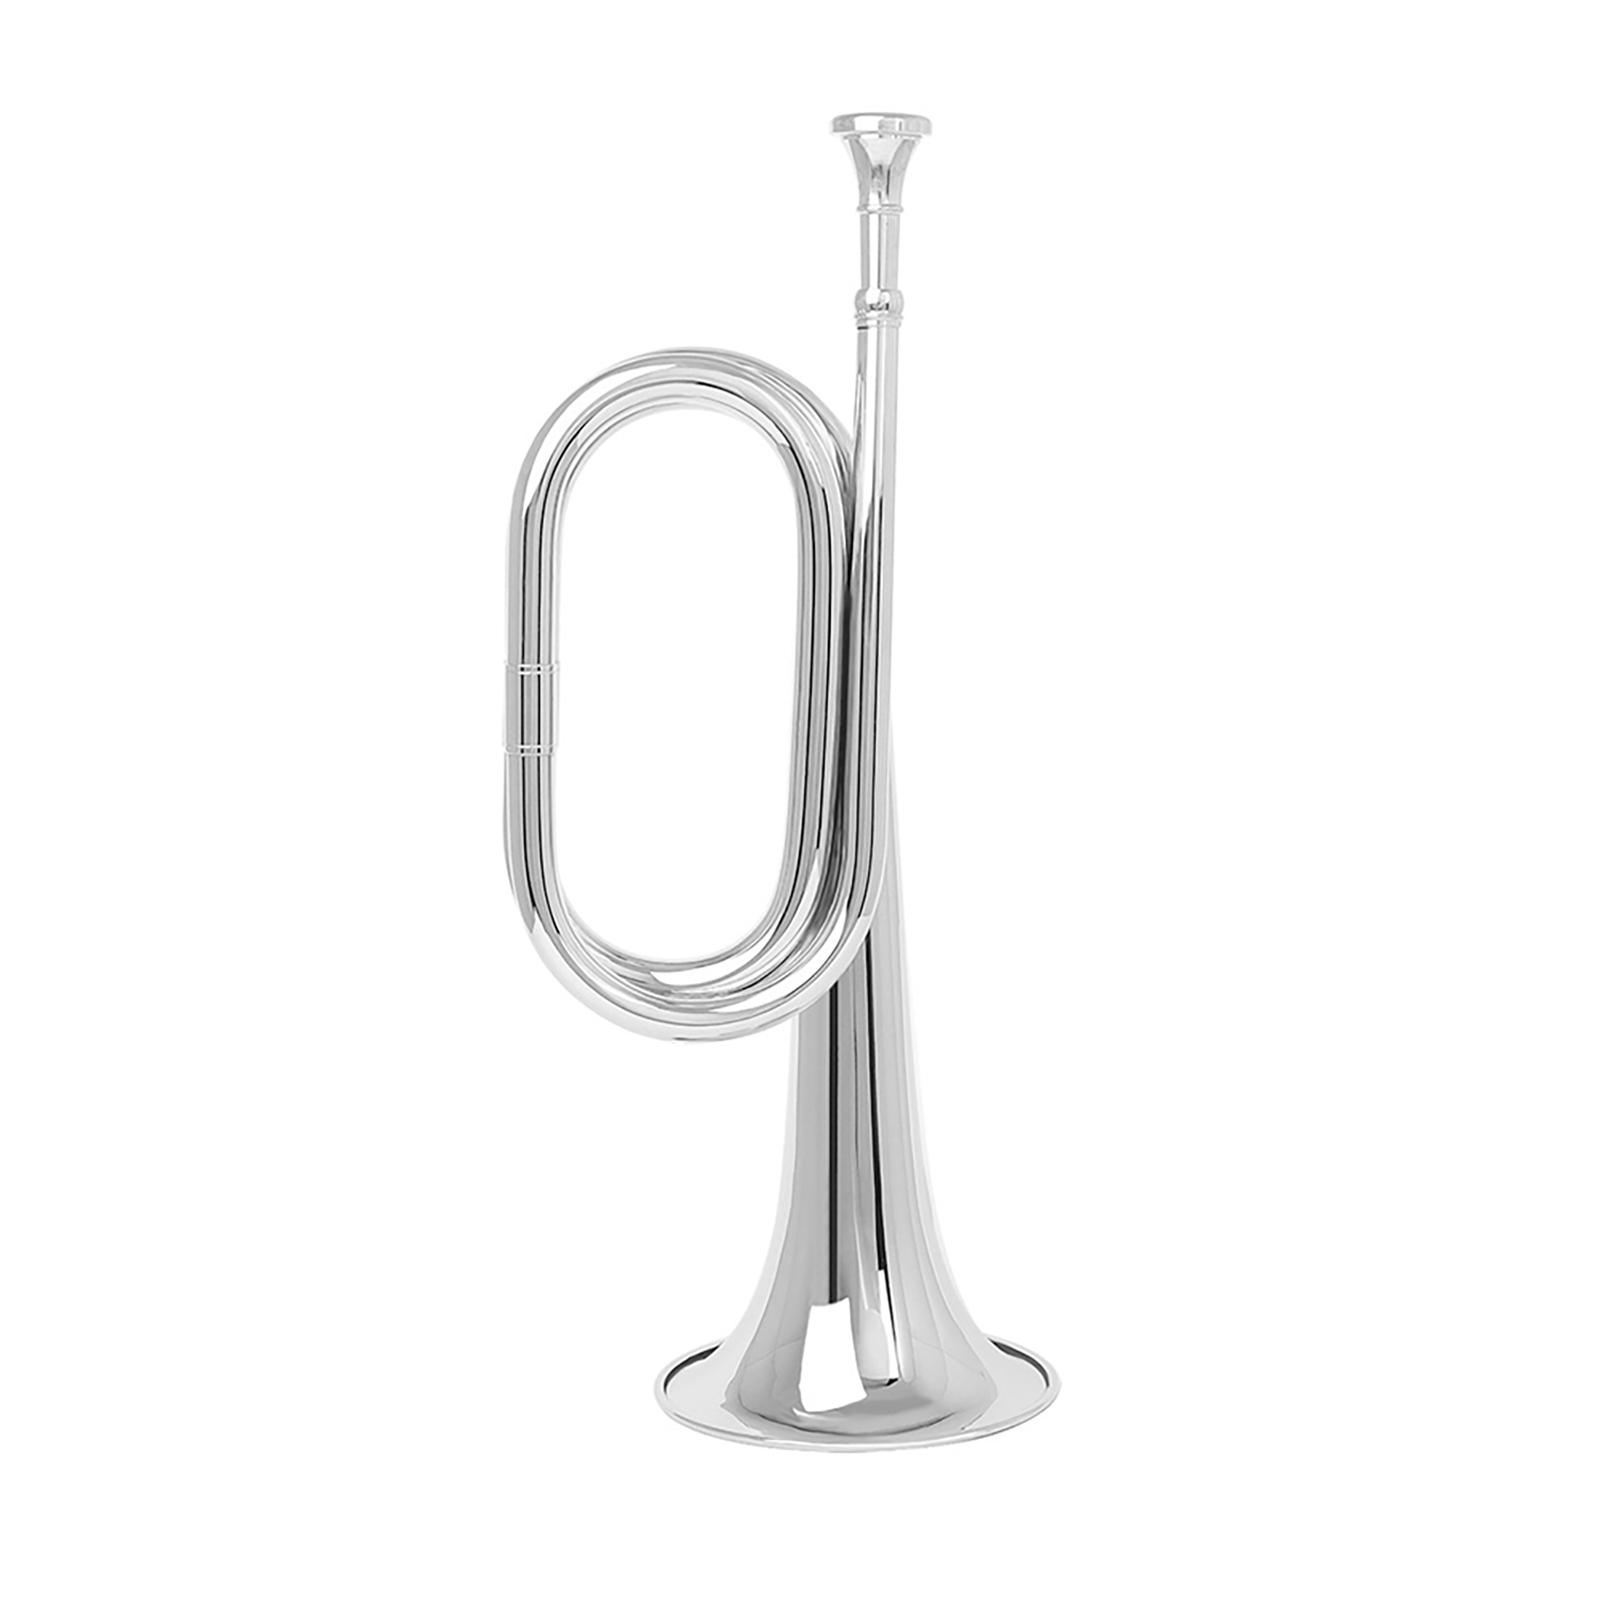 Bugle Trumpet Big Horn Thickened Tubes Curved Mouthpiece Interface Brass Horn School Wind Instrument